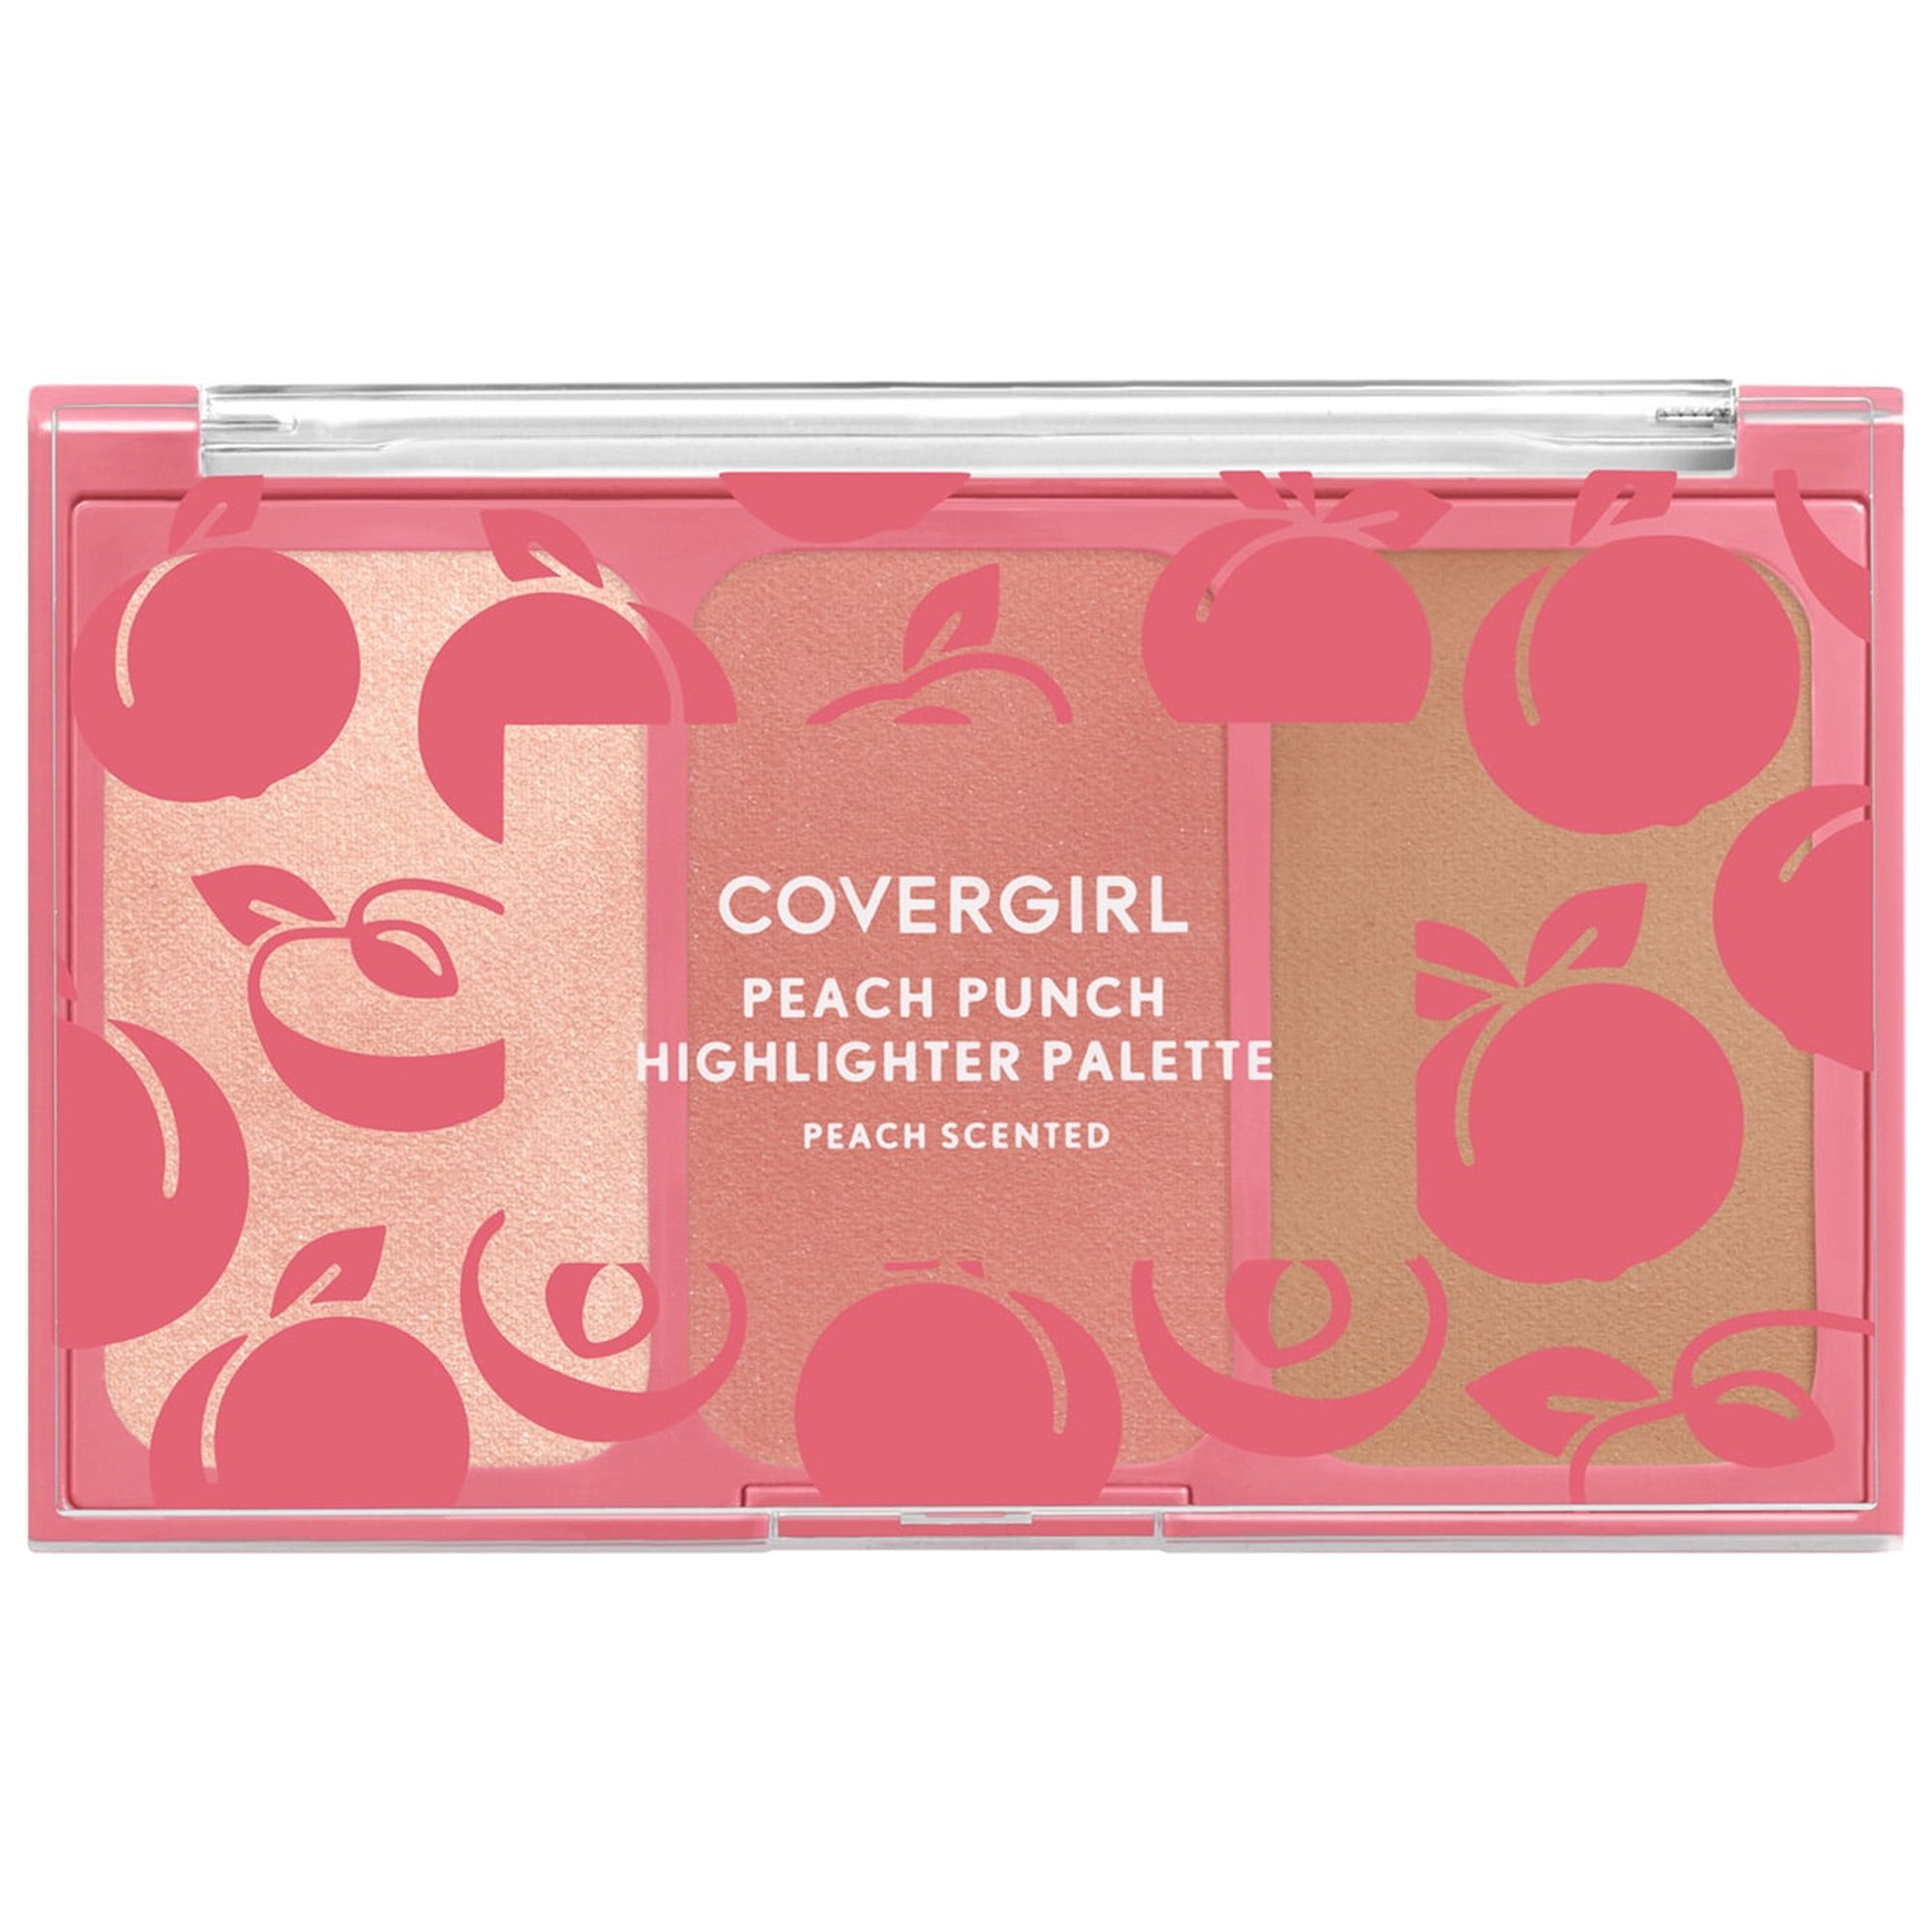 COVERGIRL Peach Scented Collection, Peach Punch Highlighter Palette - image 1 of 4